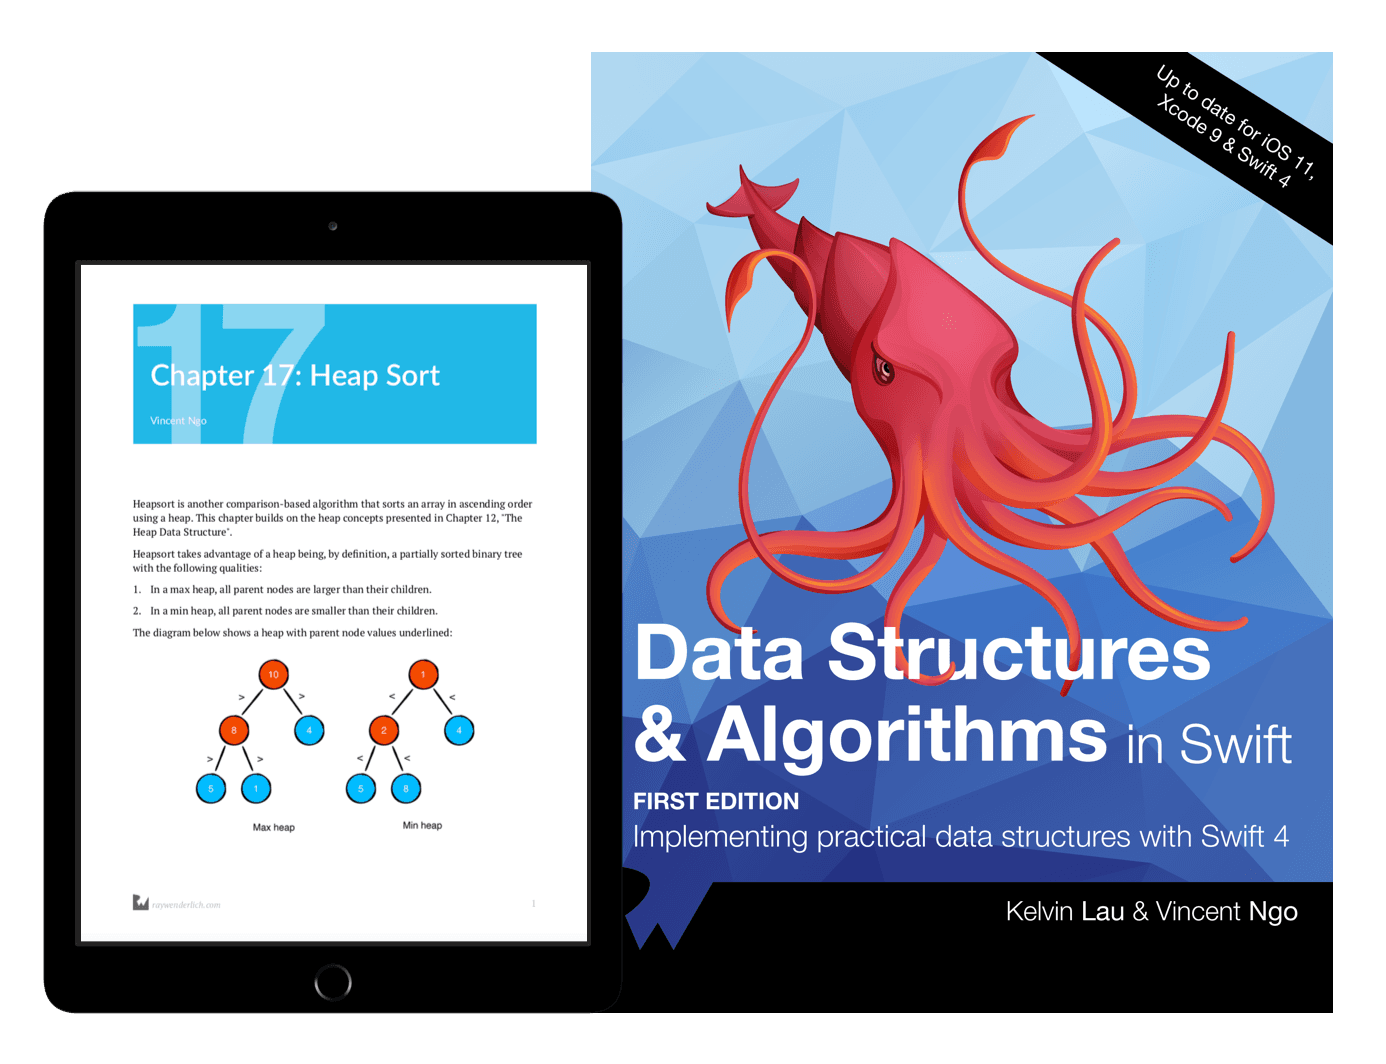 Data Structures & Algorithms in Swift Book